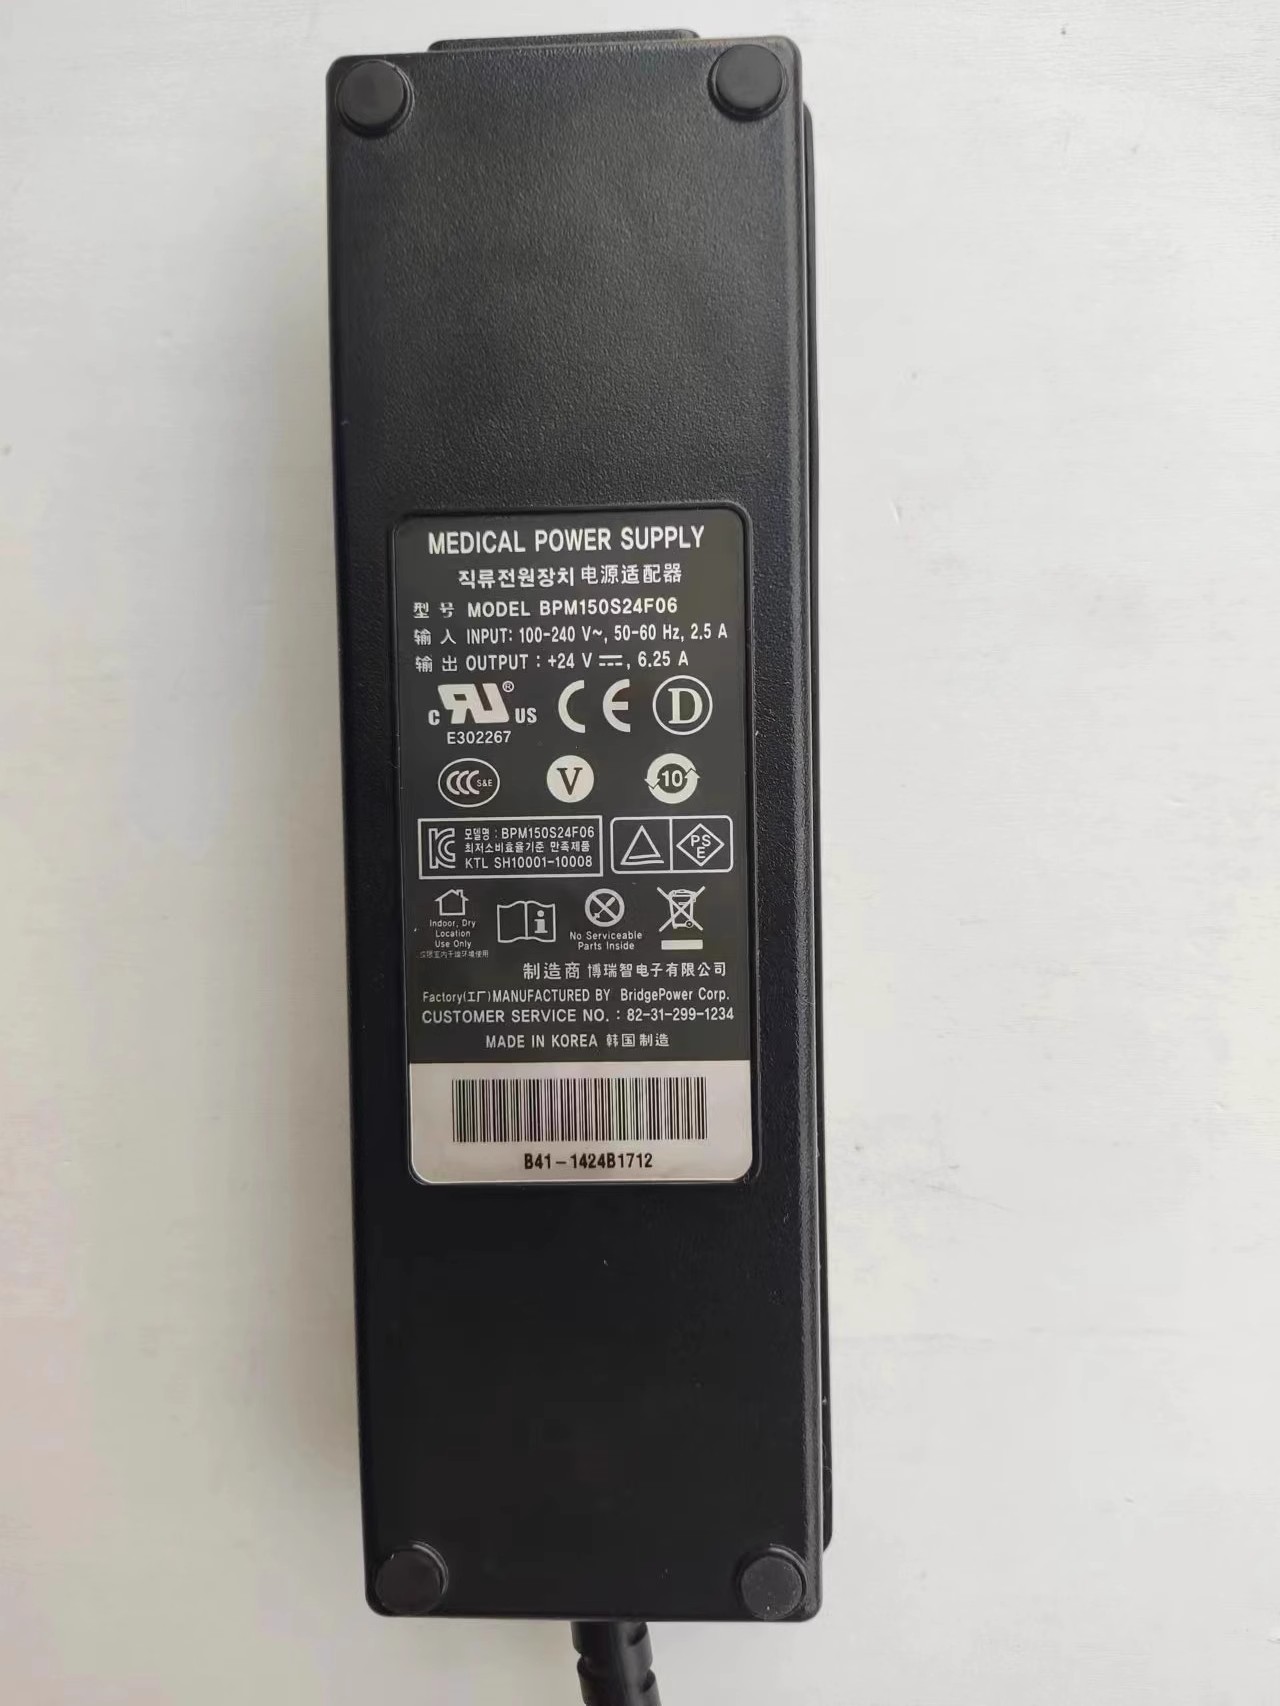 *Brand NEW* NDS 24V 6.25A AC/DC AC ADAPTER MEDICAL BPM150S24F06 N-90X0568-G POWER Supply